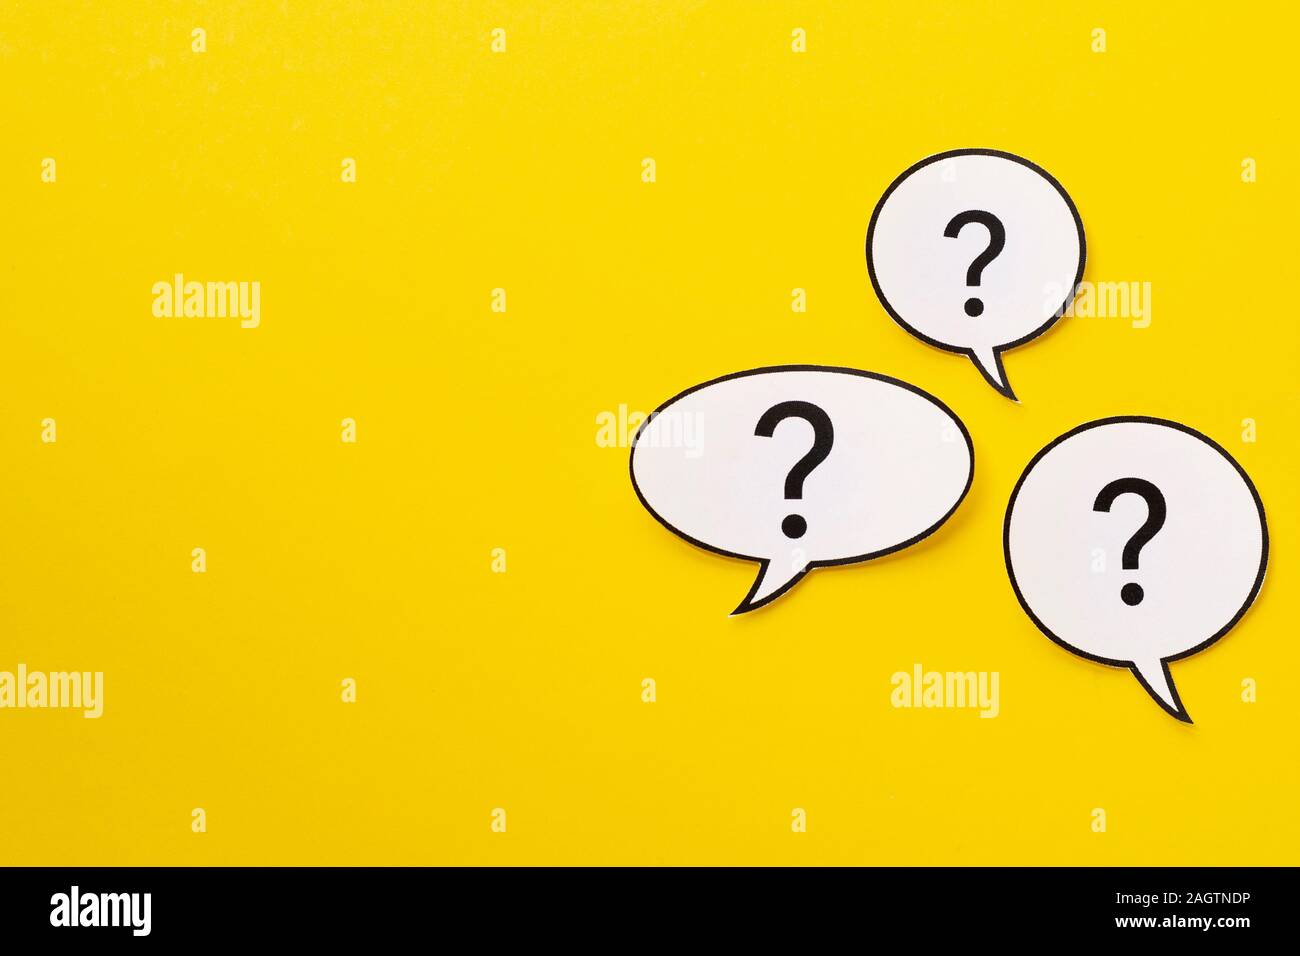 Three different shaped speech bubbles over a bright yellow background Stock Photo